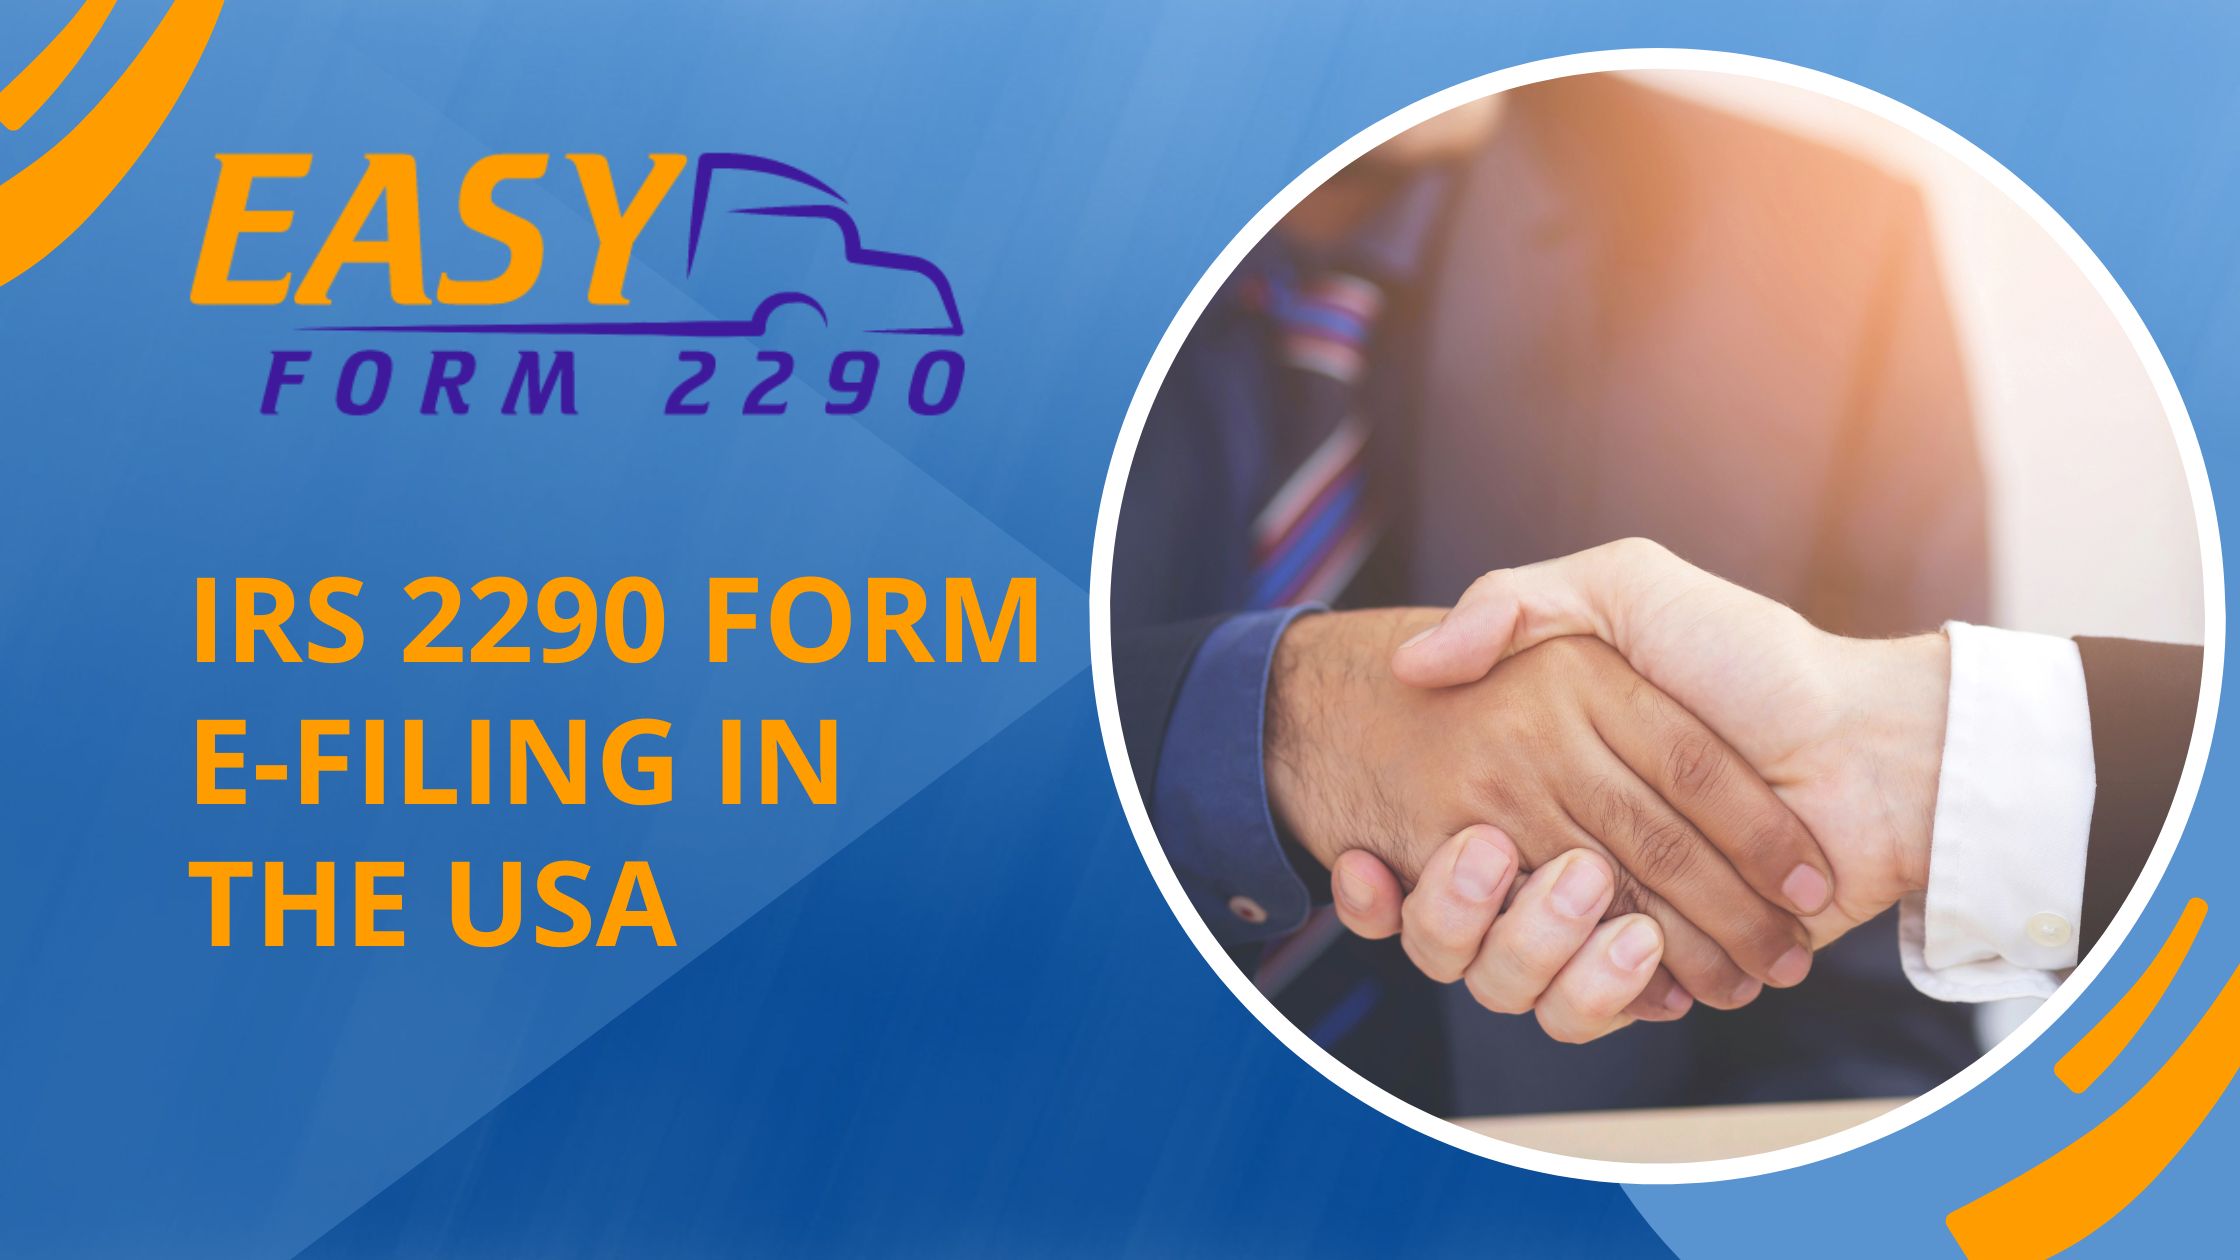 IRS 2290 FORM E-FILING IN THE USA